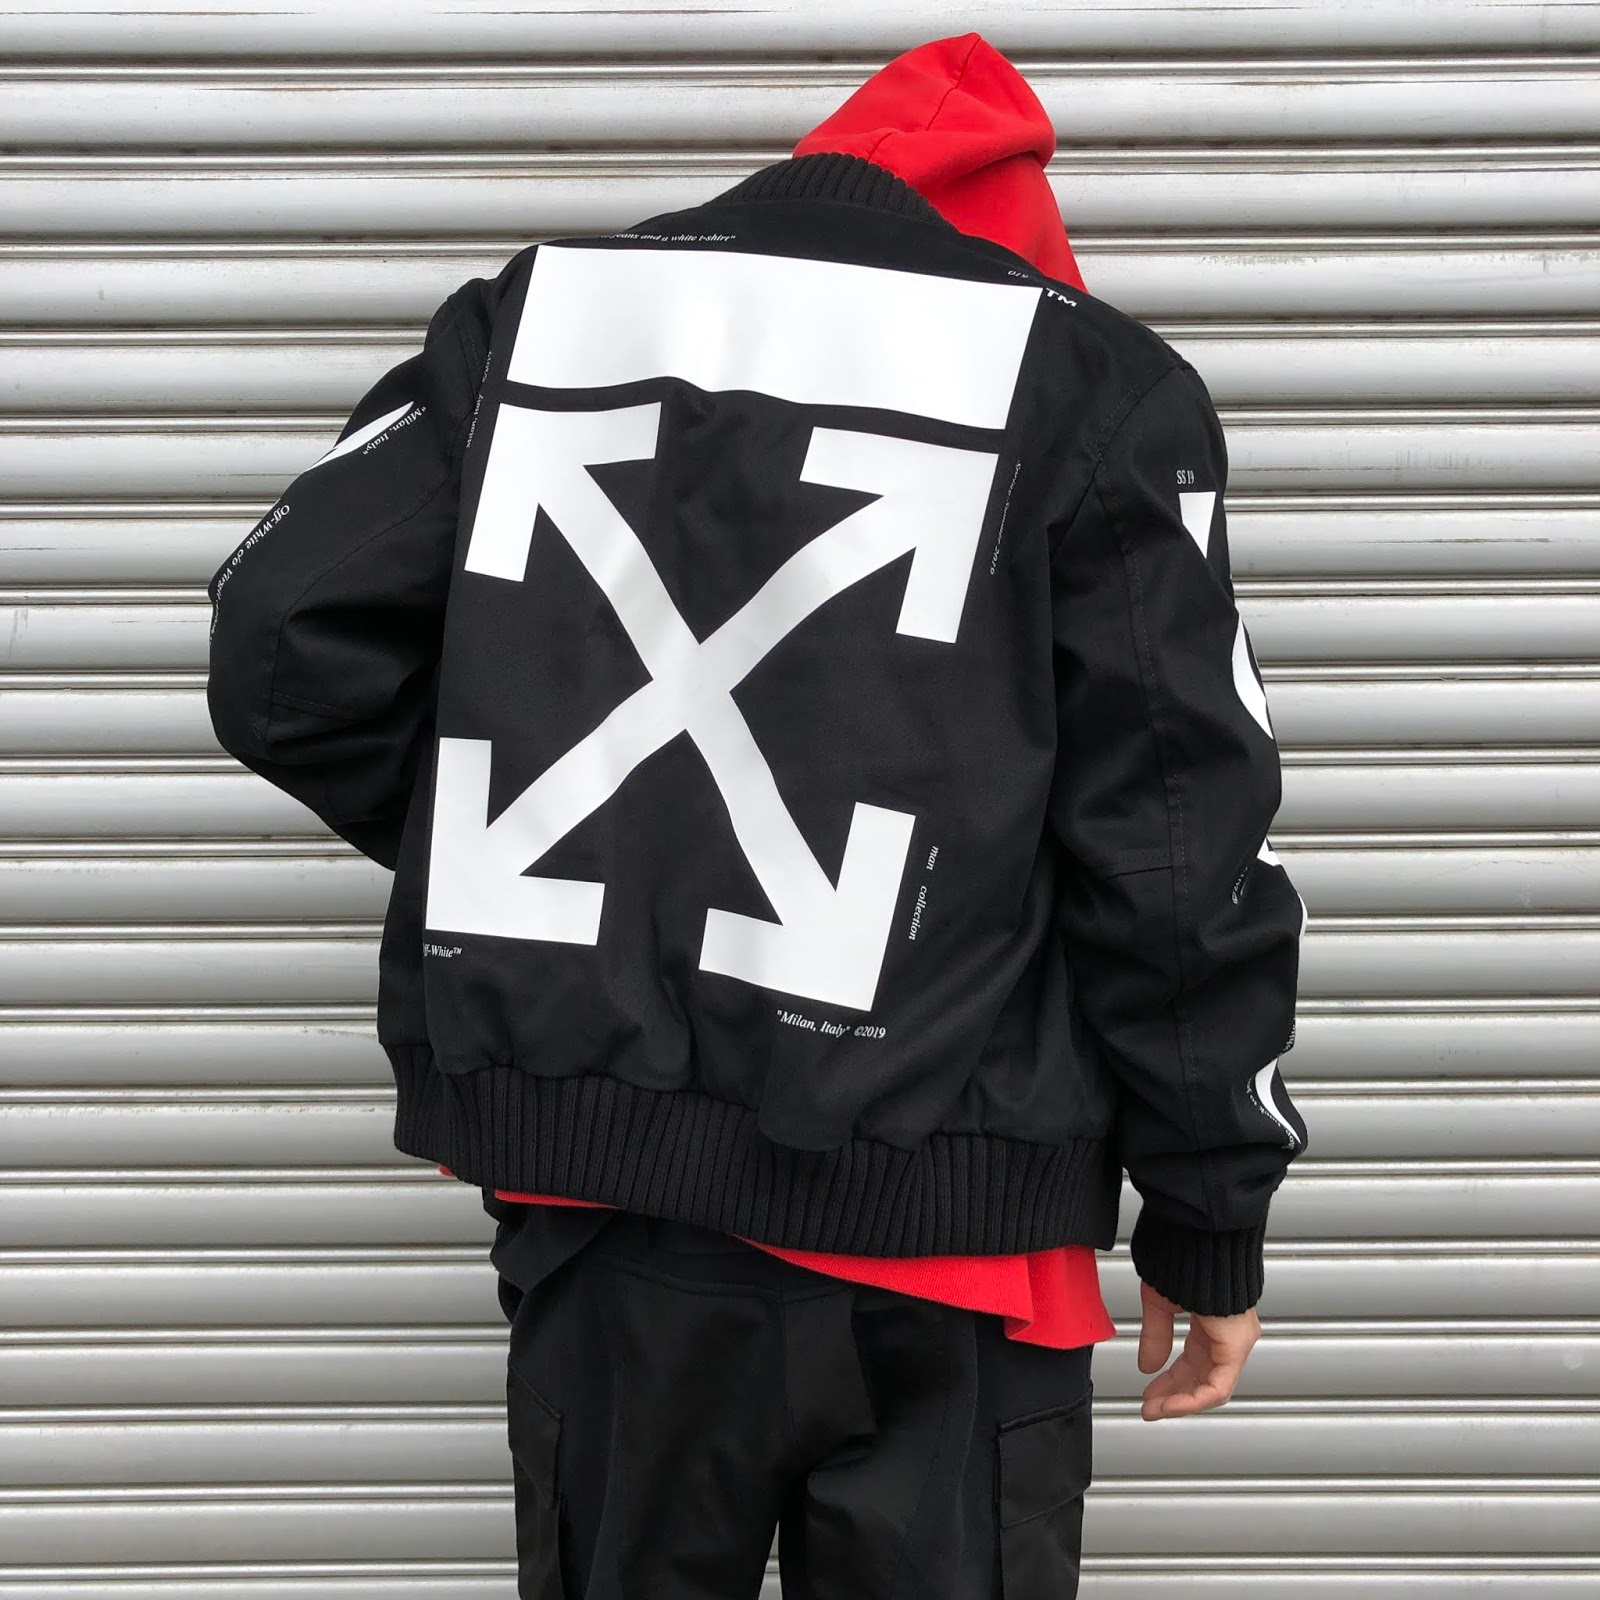 OFF-WHITE c/o Virgil Abloh 19SS main collection